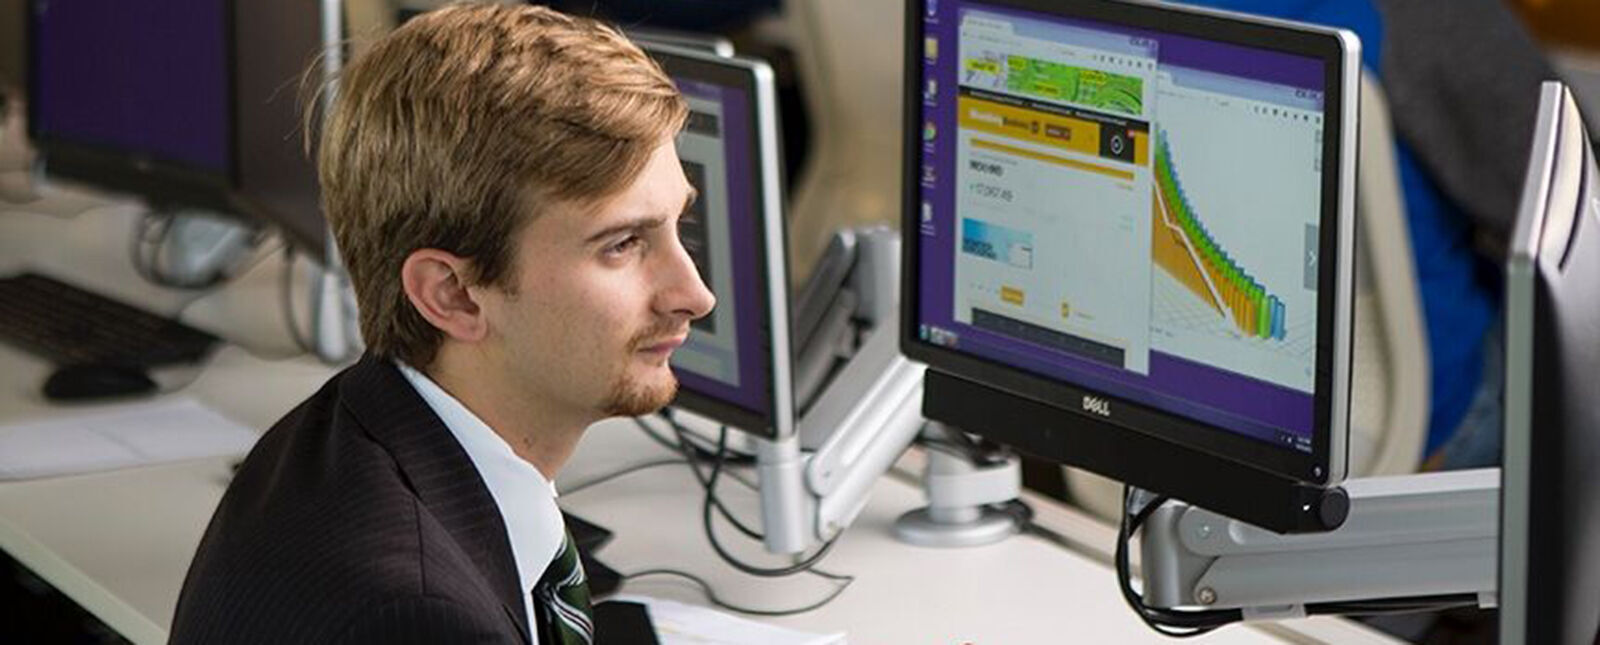 A student in a suit studies financial information on a computer in the Malesardi Financial Trading Room